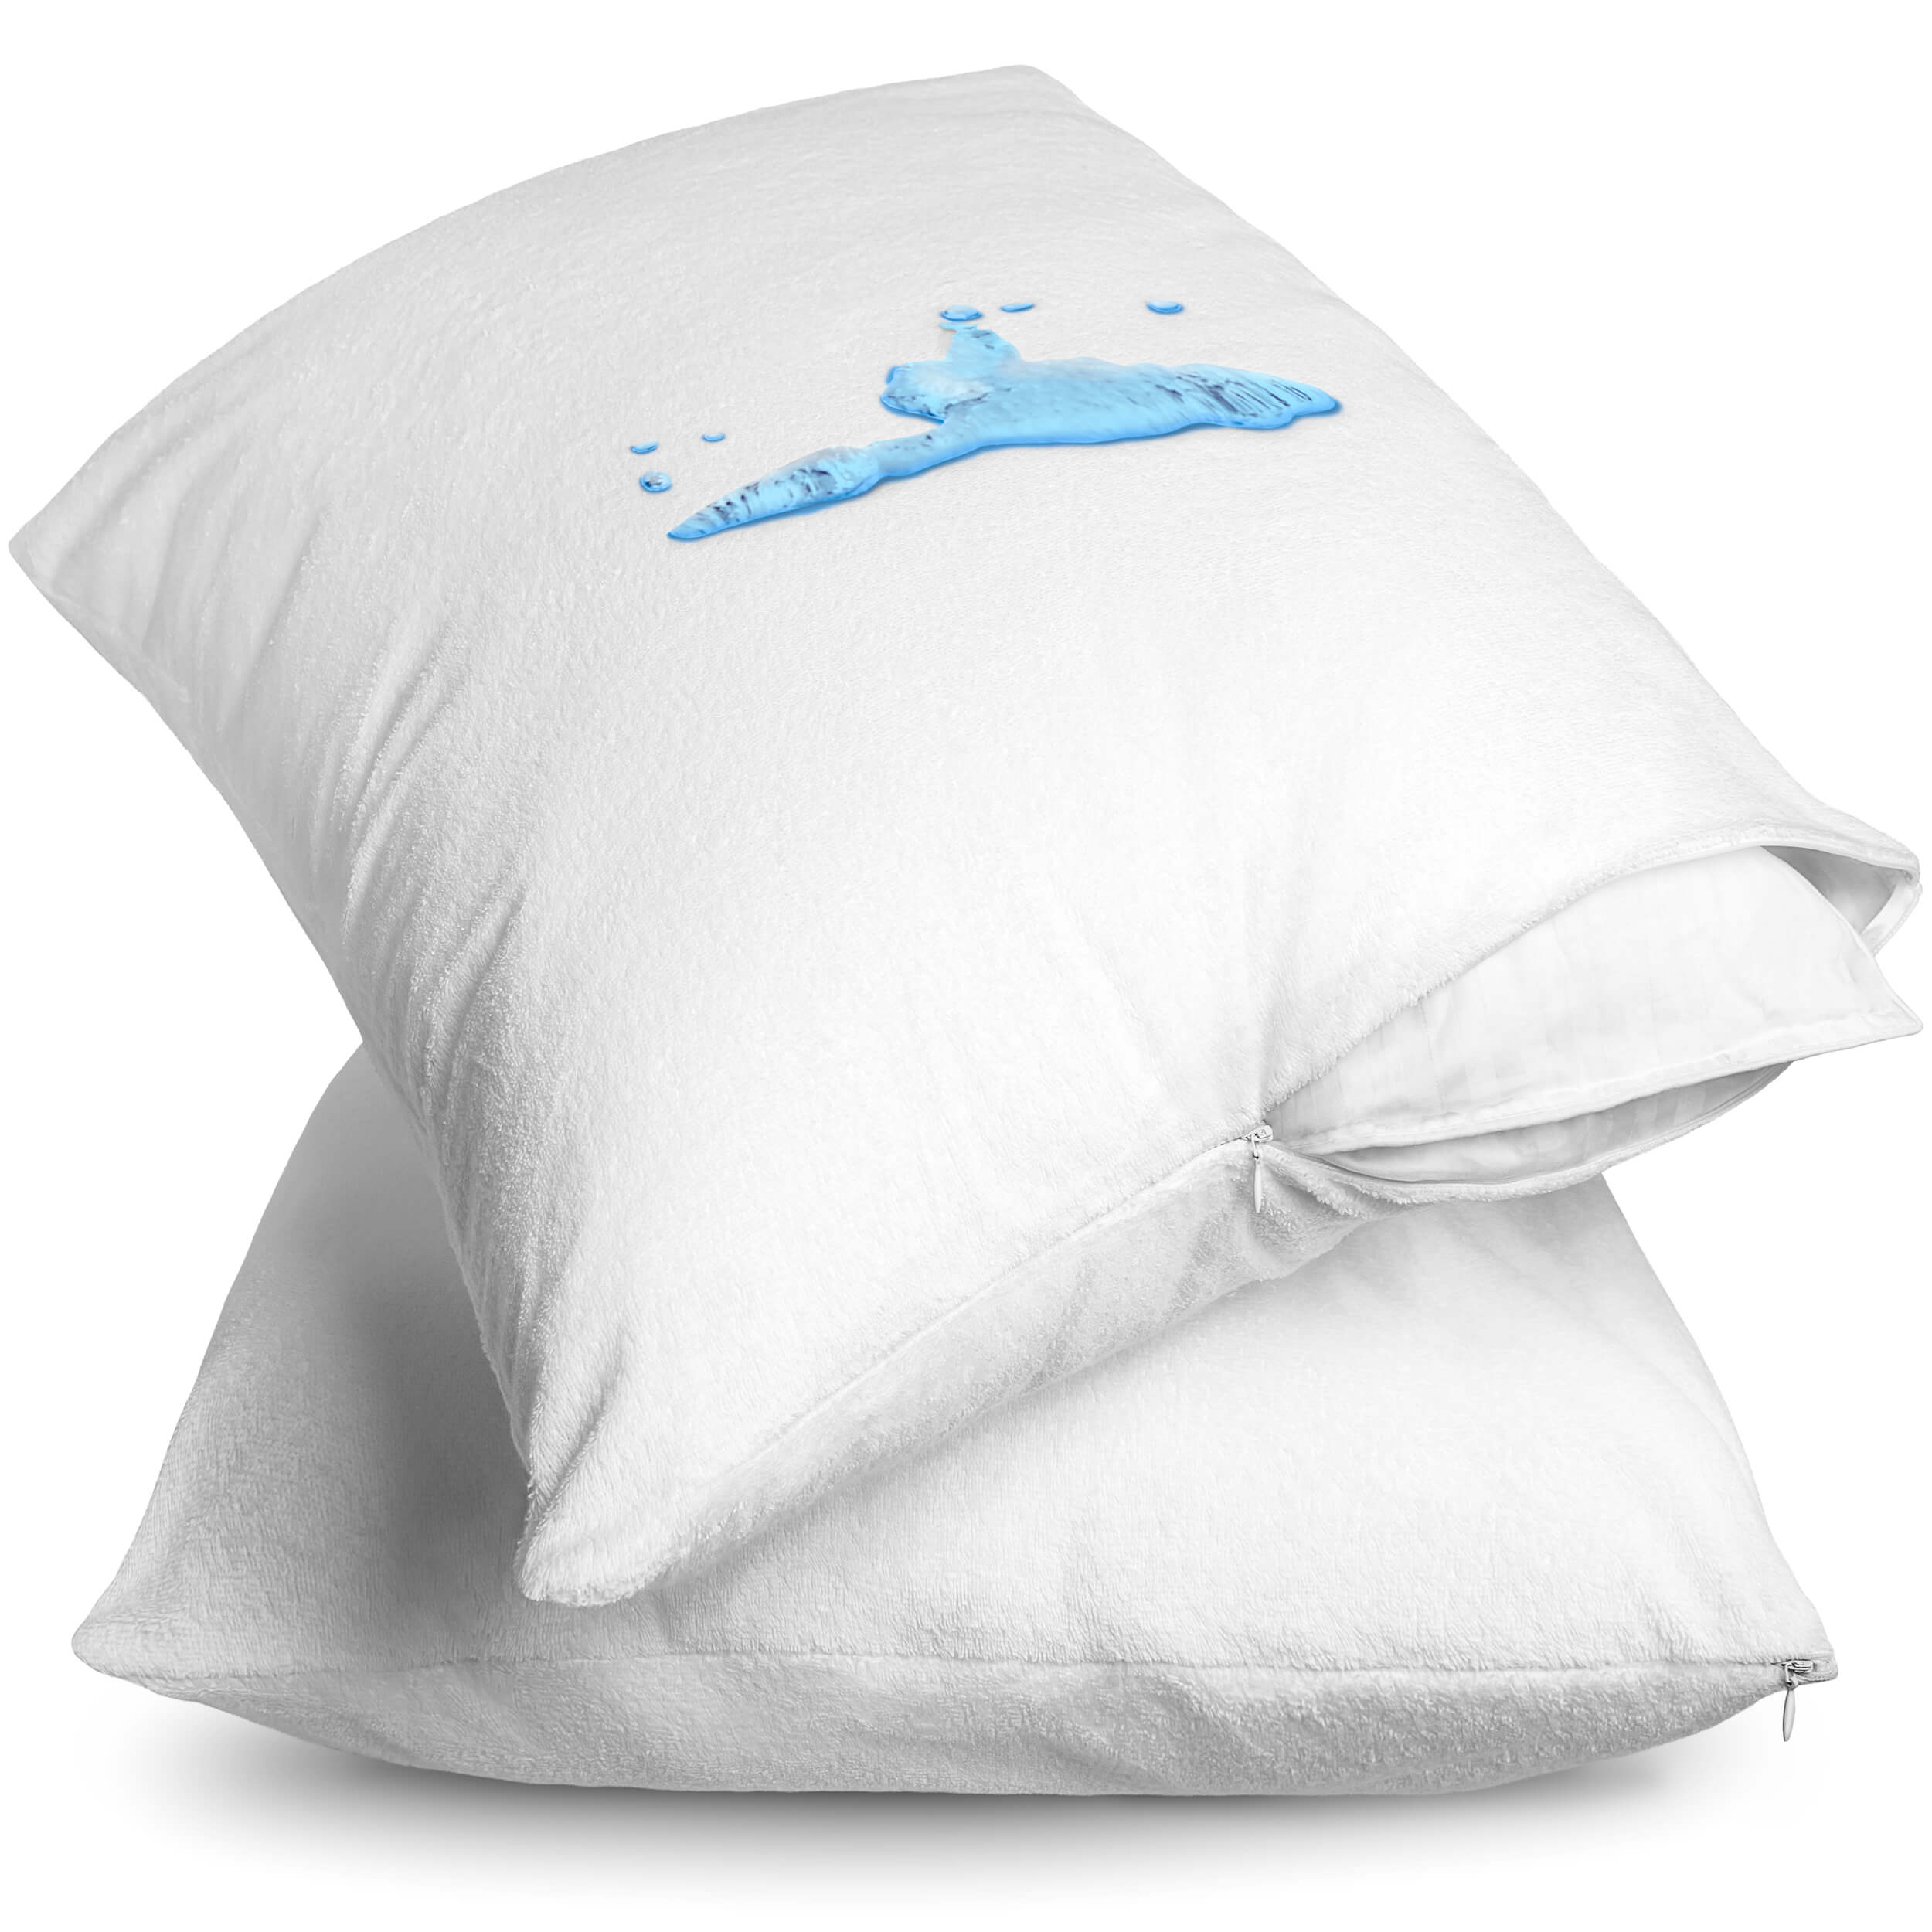 Two pillow protectors on pillows stacked